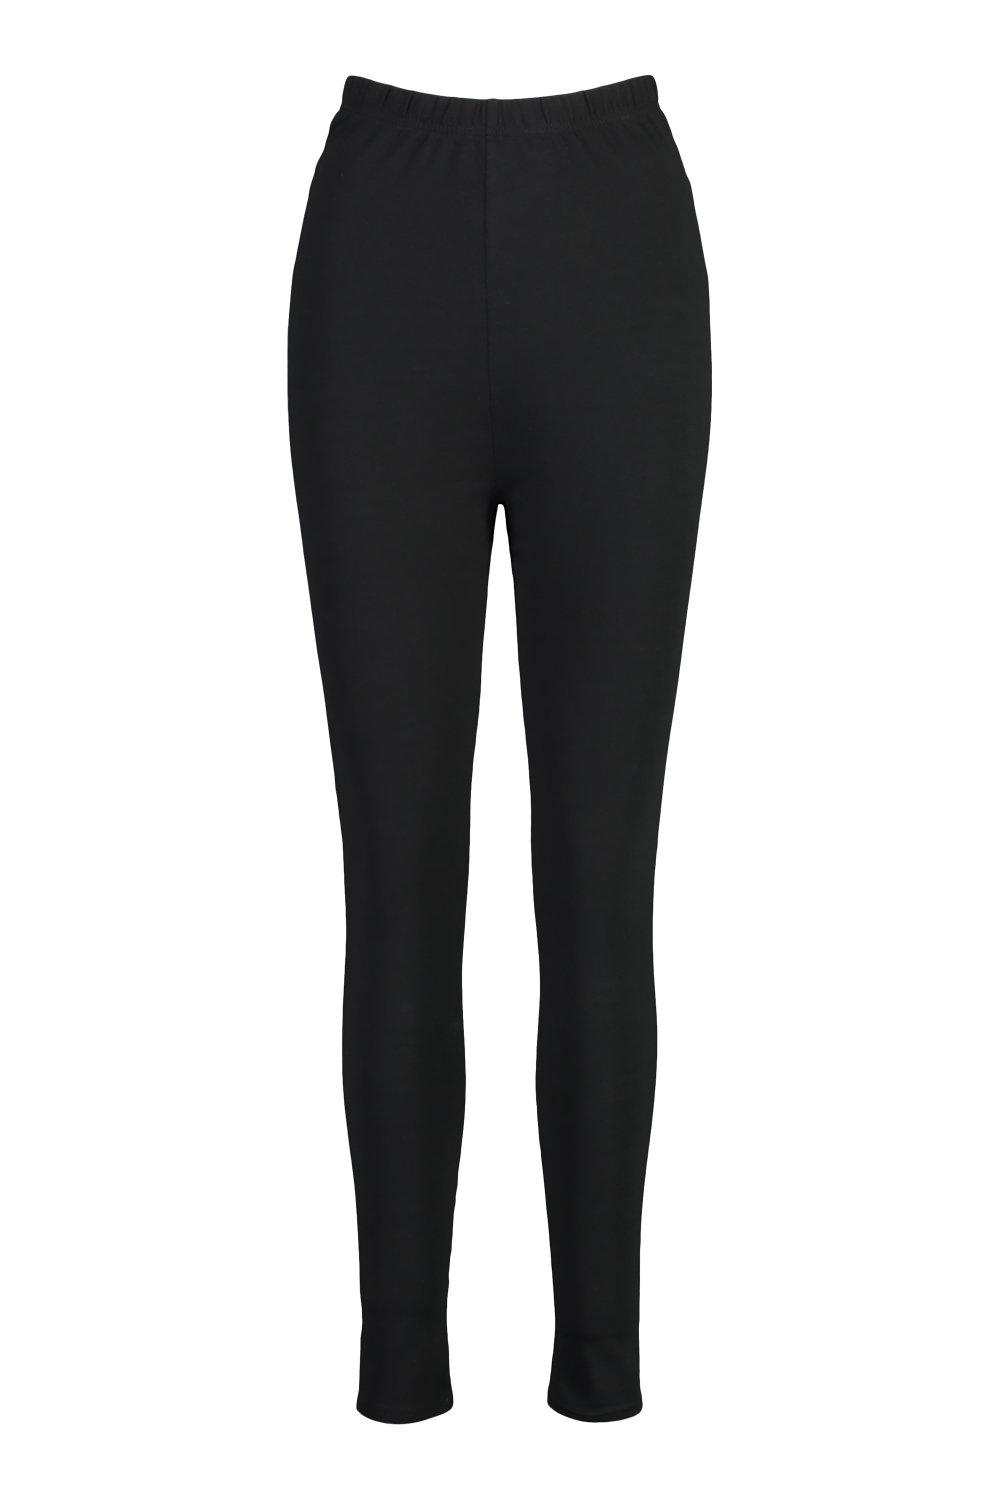 Black Ruched Ankle Leggings, Stretchy Jersey-Knit Elasticized Waist -  Pyramid Collection Fashions That Express Fantasy And Romantic Spirit